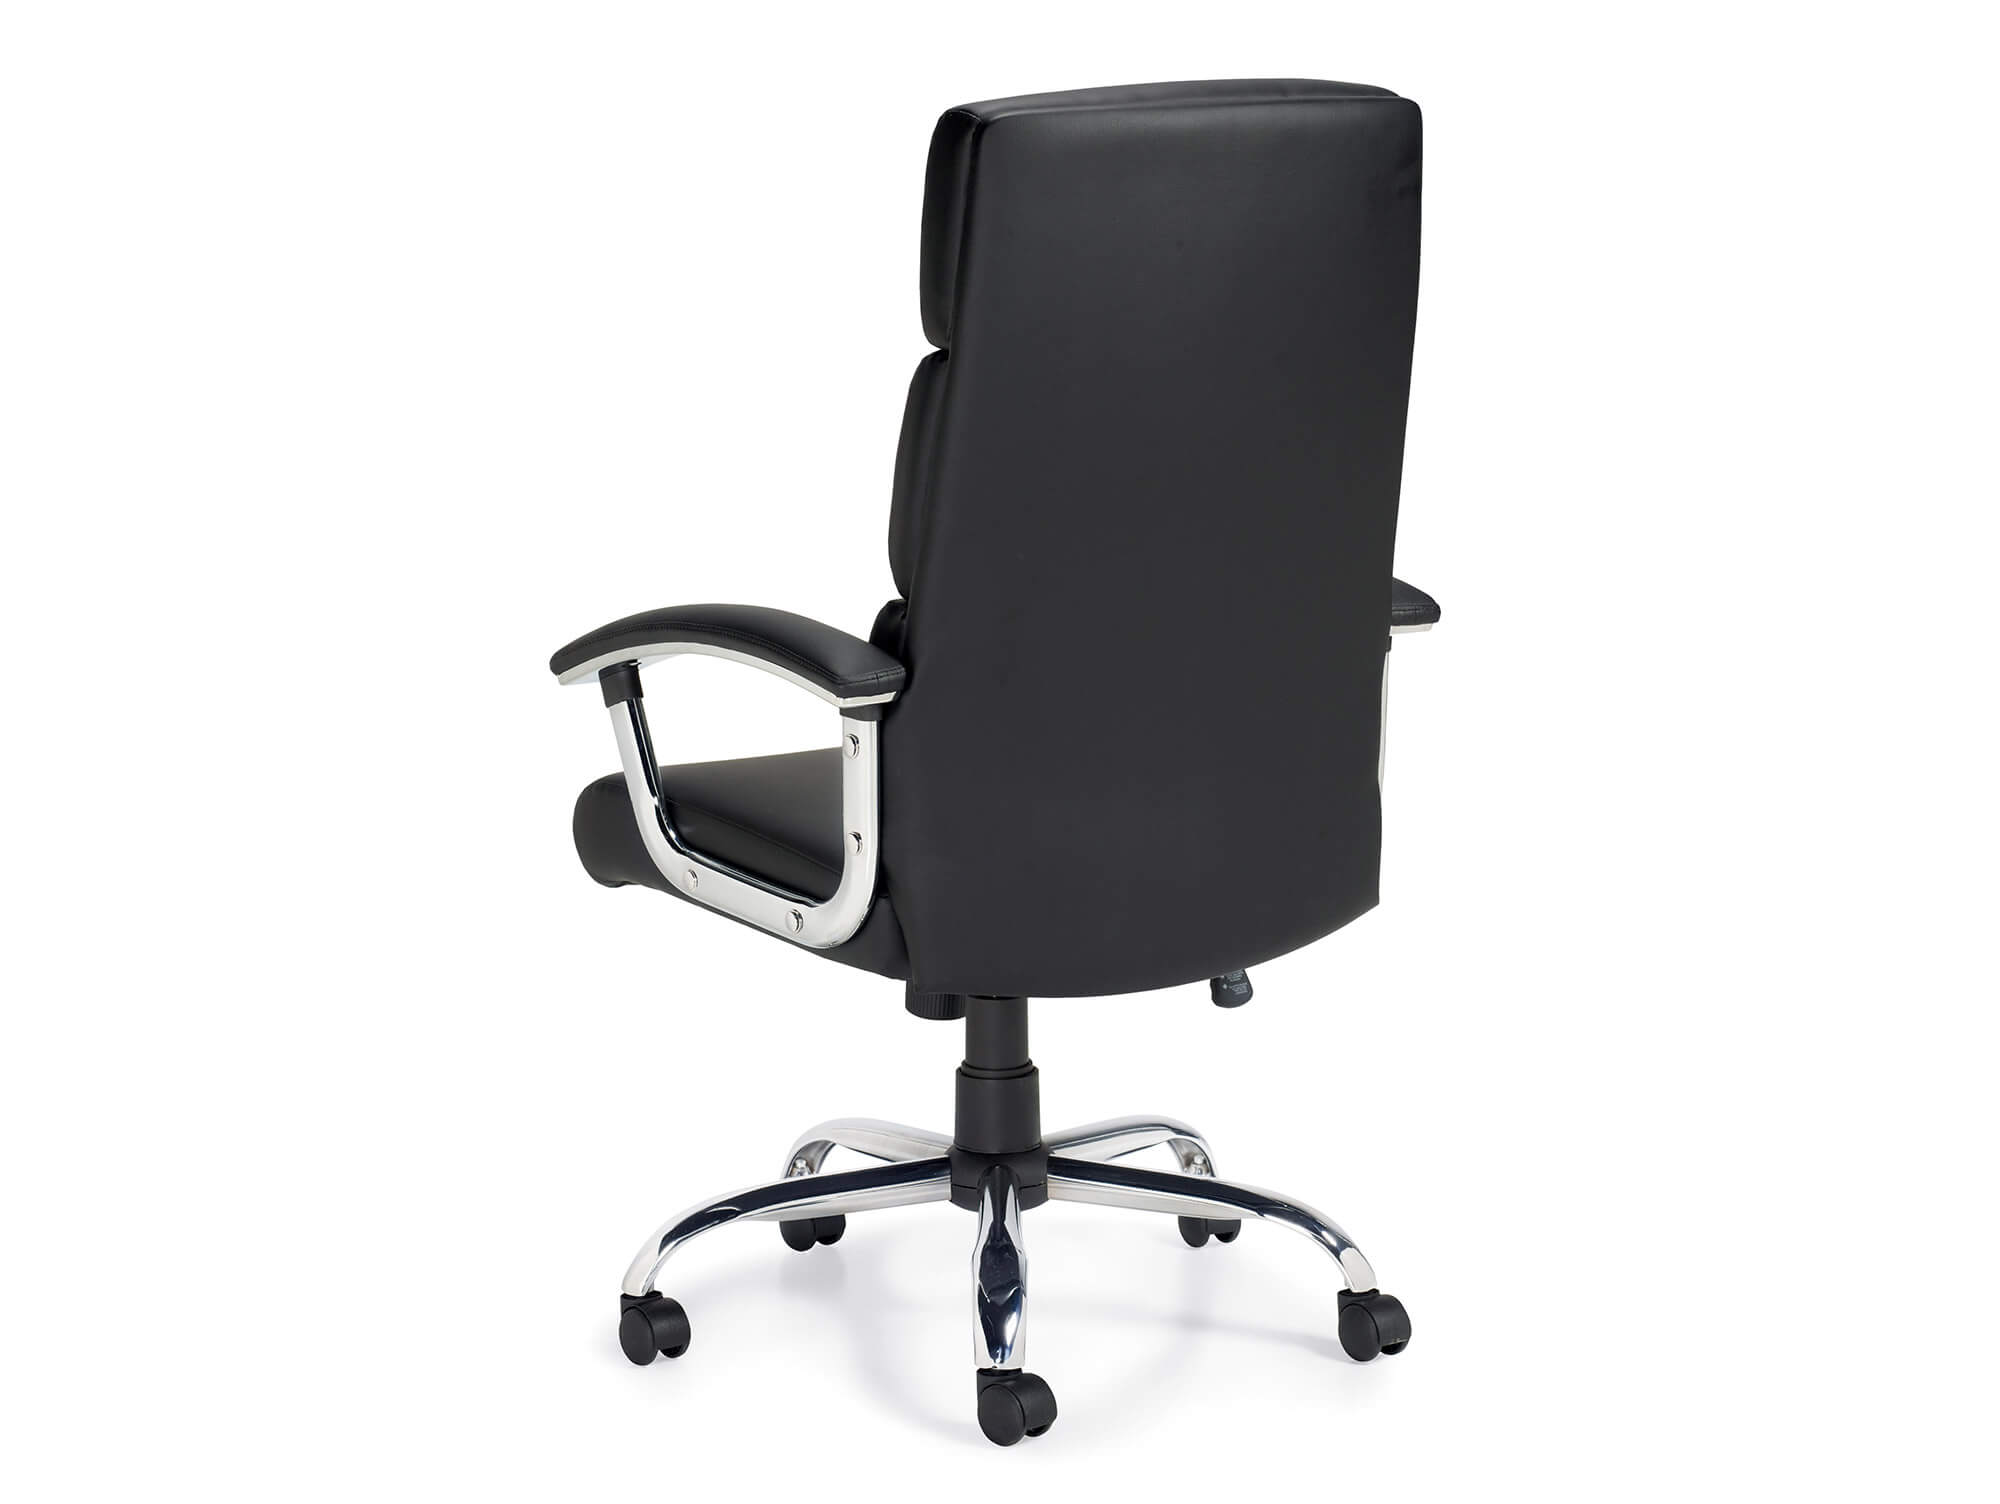 Stylish office chairs back